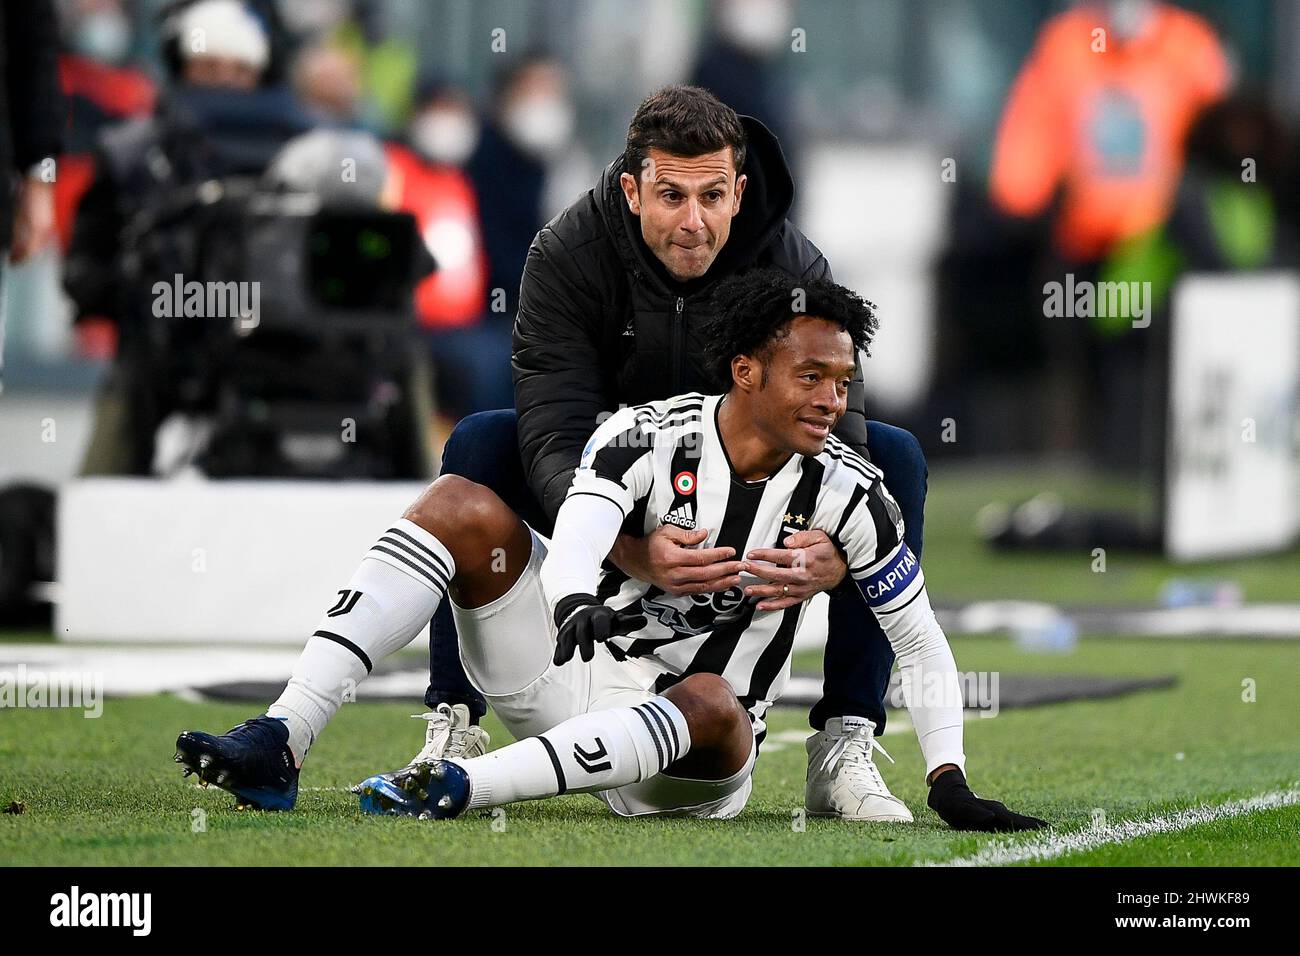 Turin, Italy. 06 March 2022. Thiago Motta, head coach of Spezia Calcio,  helps Juan Cuadrado of Juventus FC to stand up during the Serie A football  match between Juventus FC and Spezia